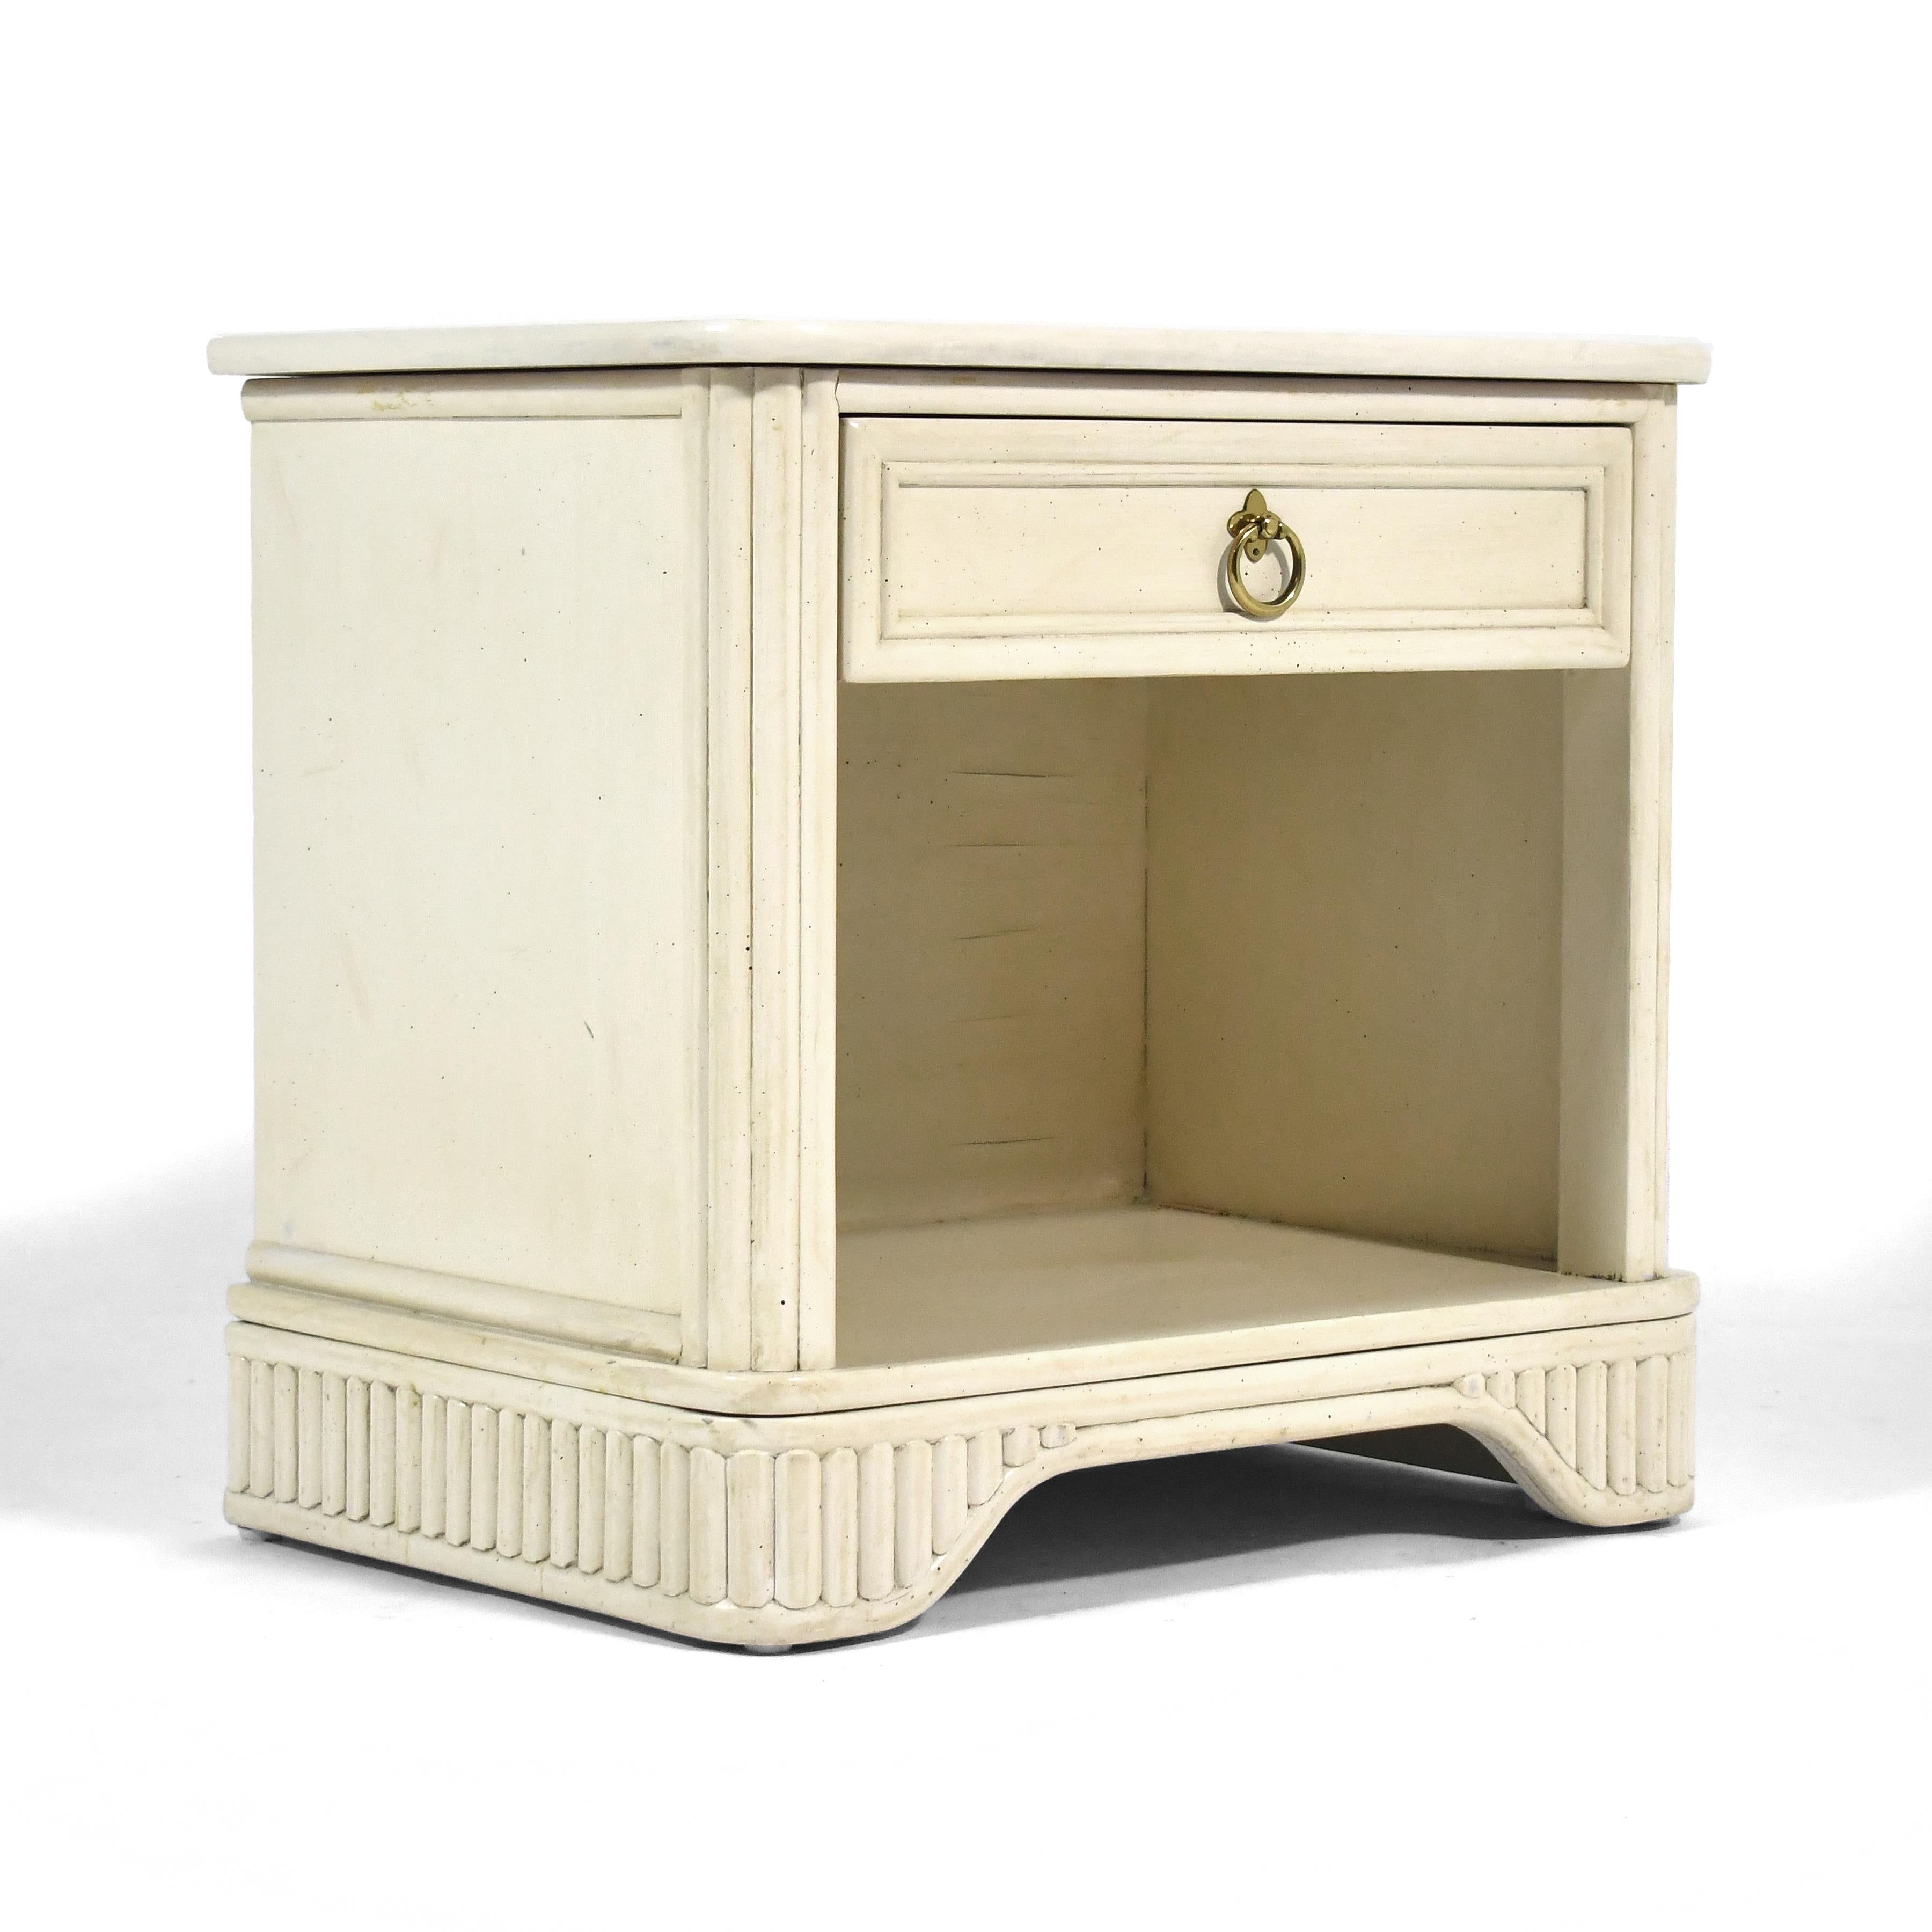 This lovely nightstand by Ficks Reed has a subtle organic modern design is well constructed.
Also available are a pair of matching nightstands.

23